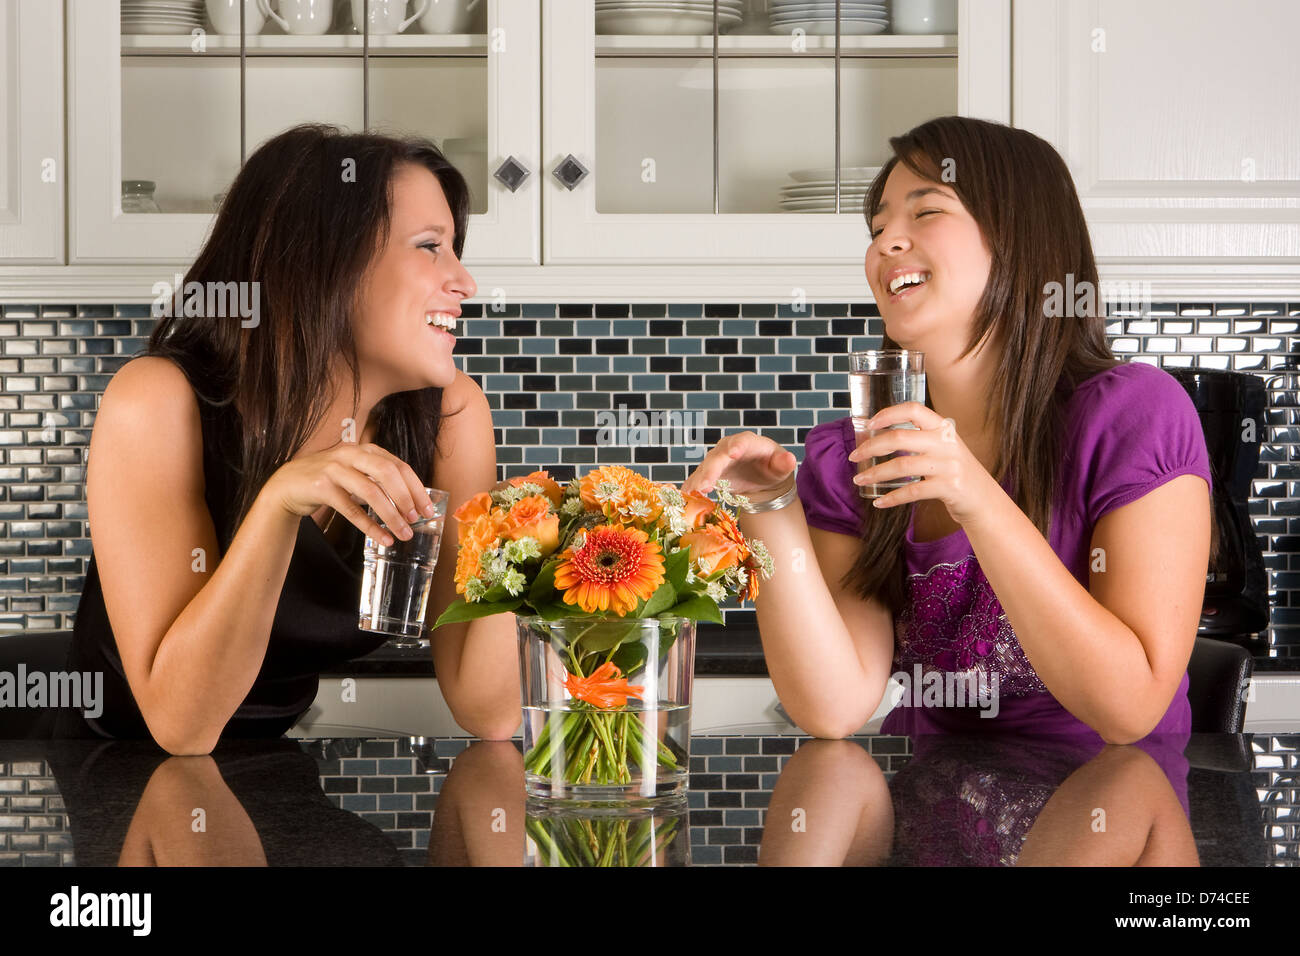 Two friends drinking water in a relaxed moment in the kitchen Stock Photo